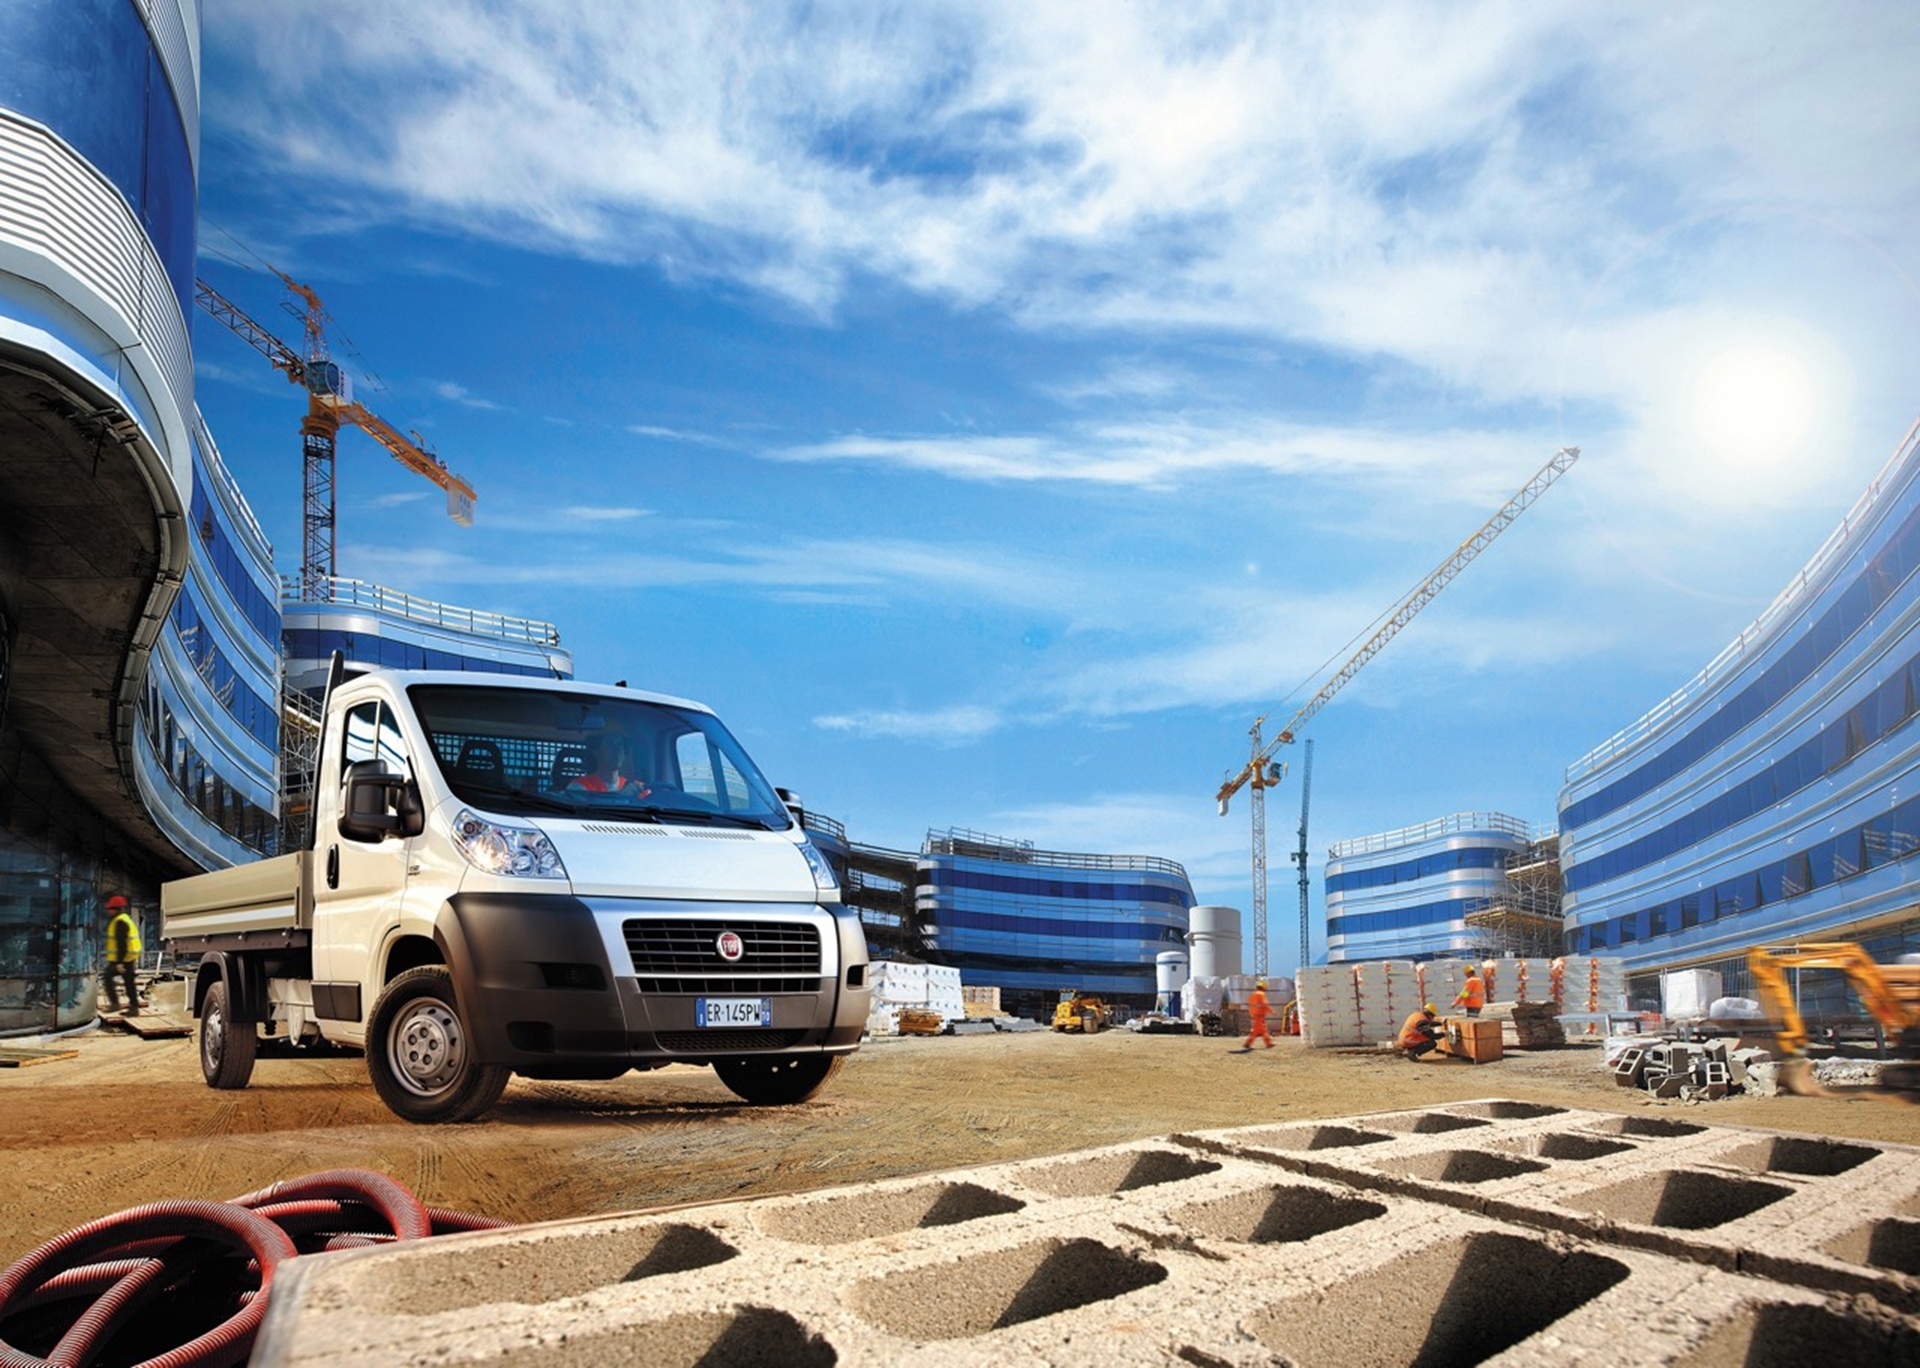 Fiat Ducato designed by business for business